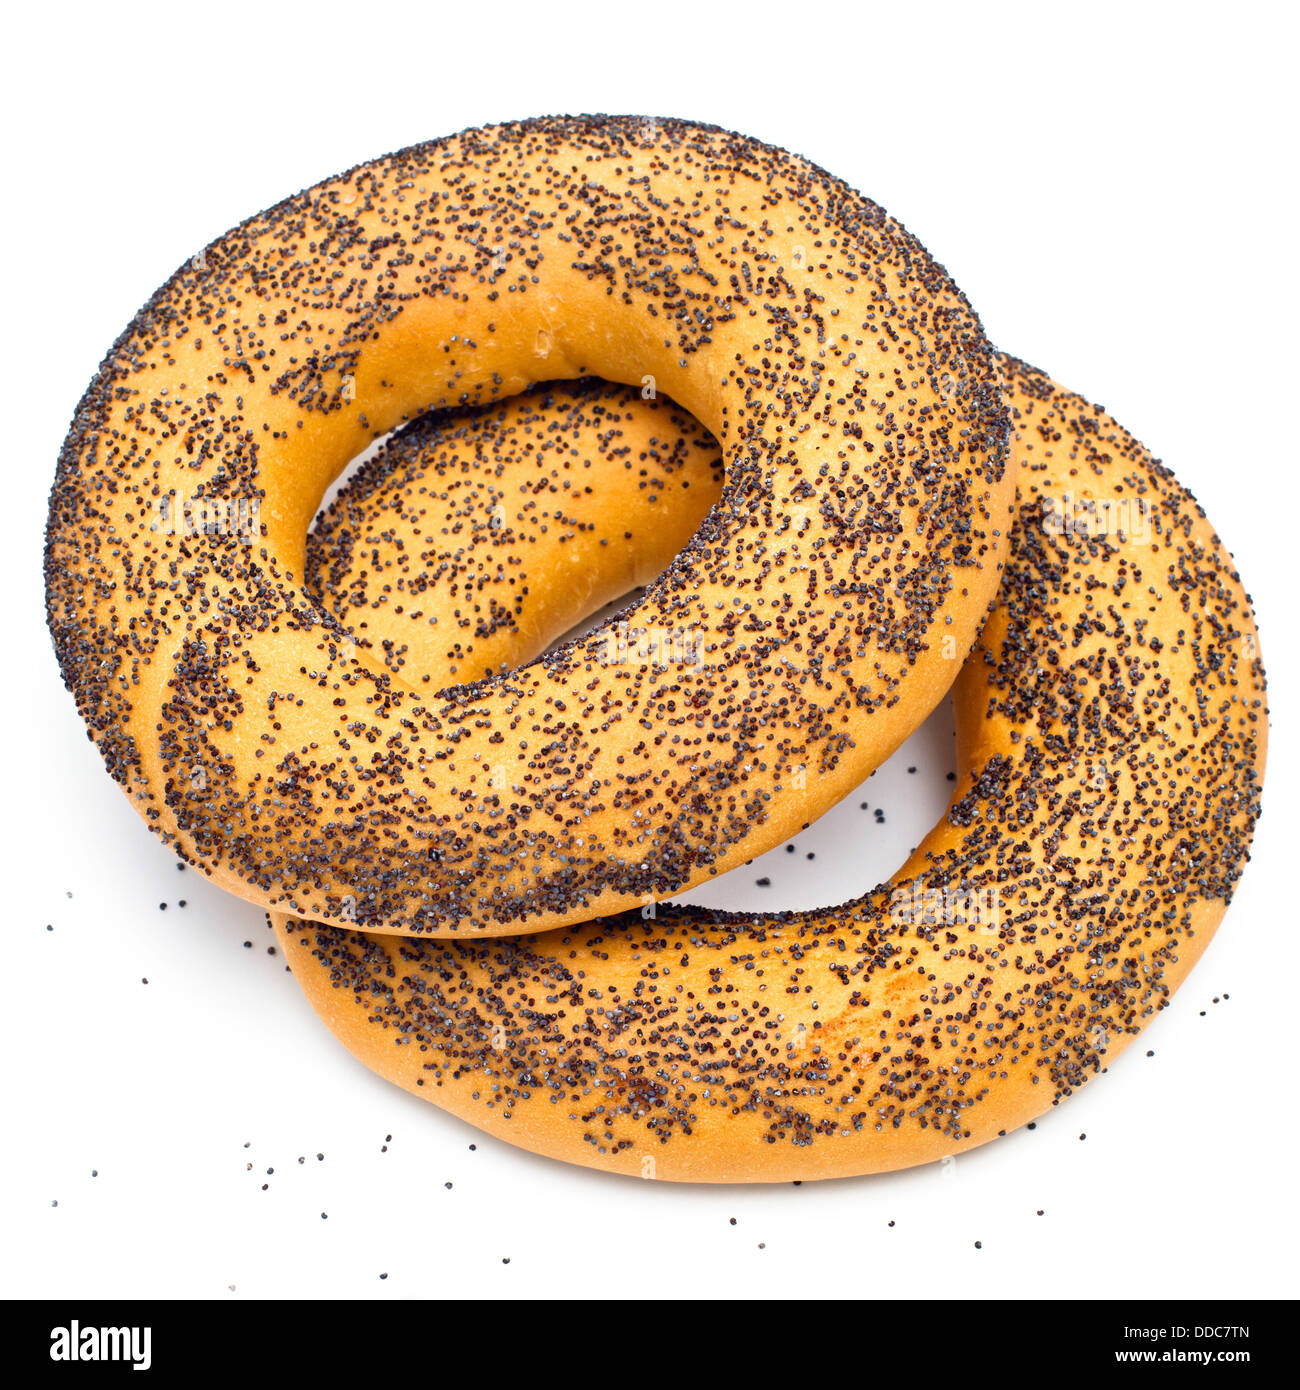 Bagel with poppy seeds on white background Stock Photo